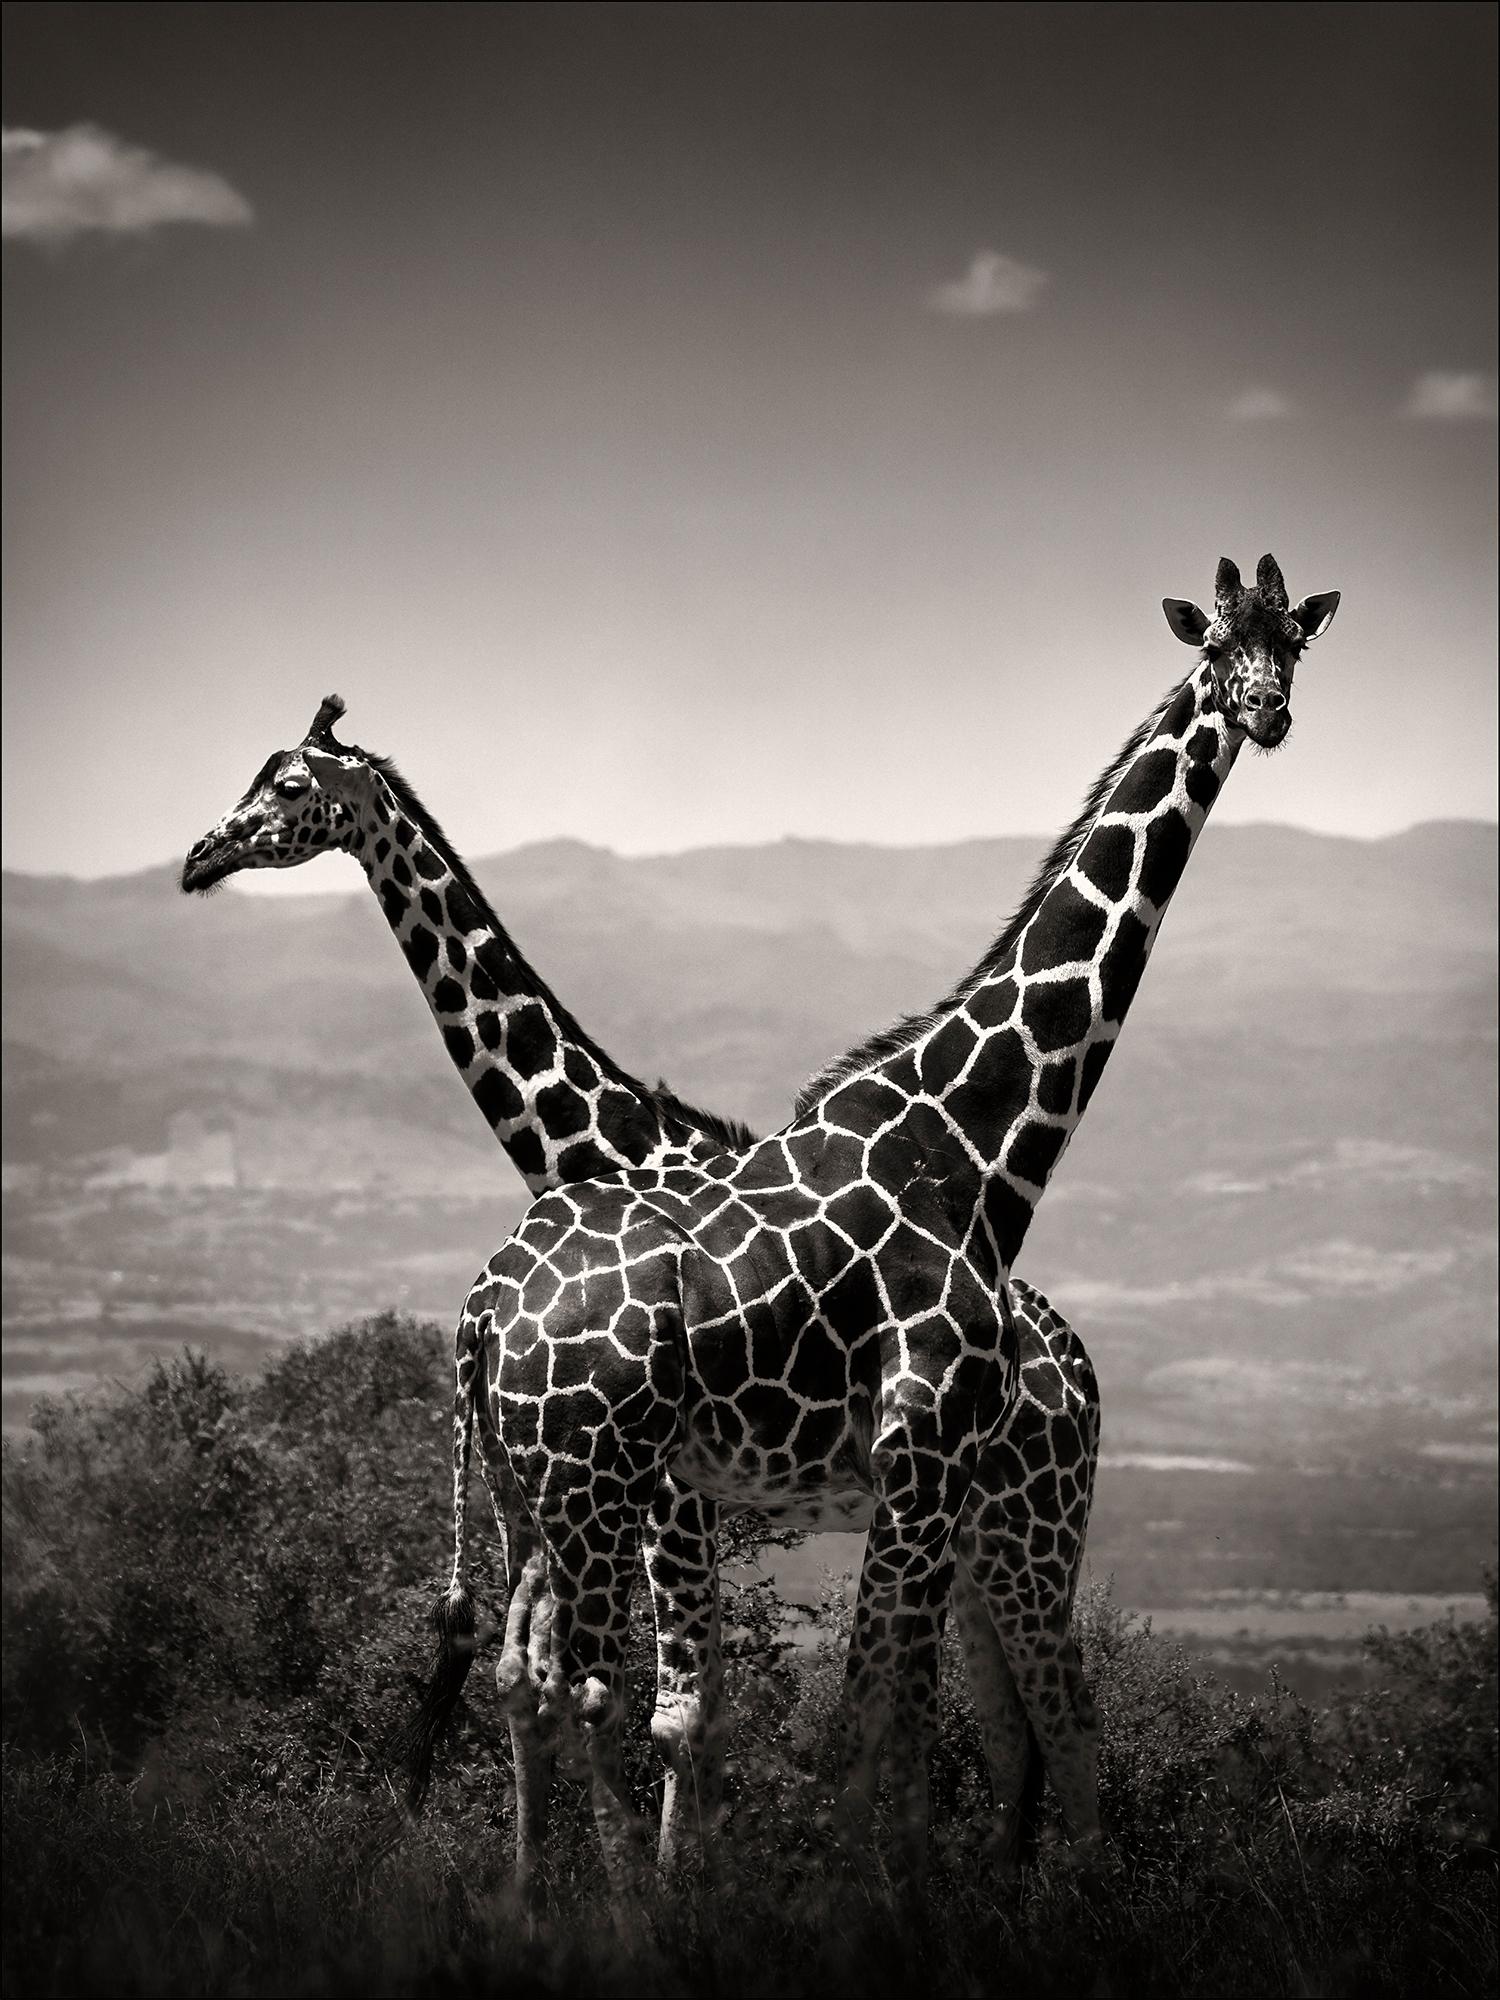 Joachim Schmeisser Black and White Photograph - Giraffes couple, animal, wildlife, black and white photography, africa